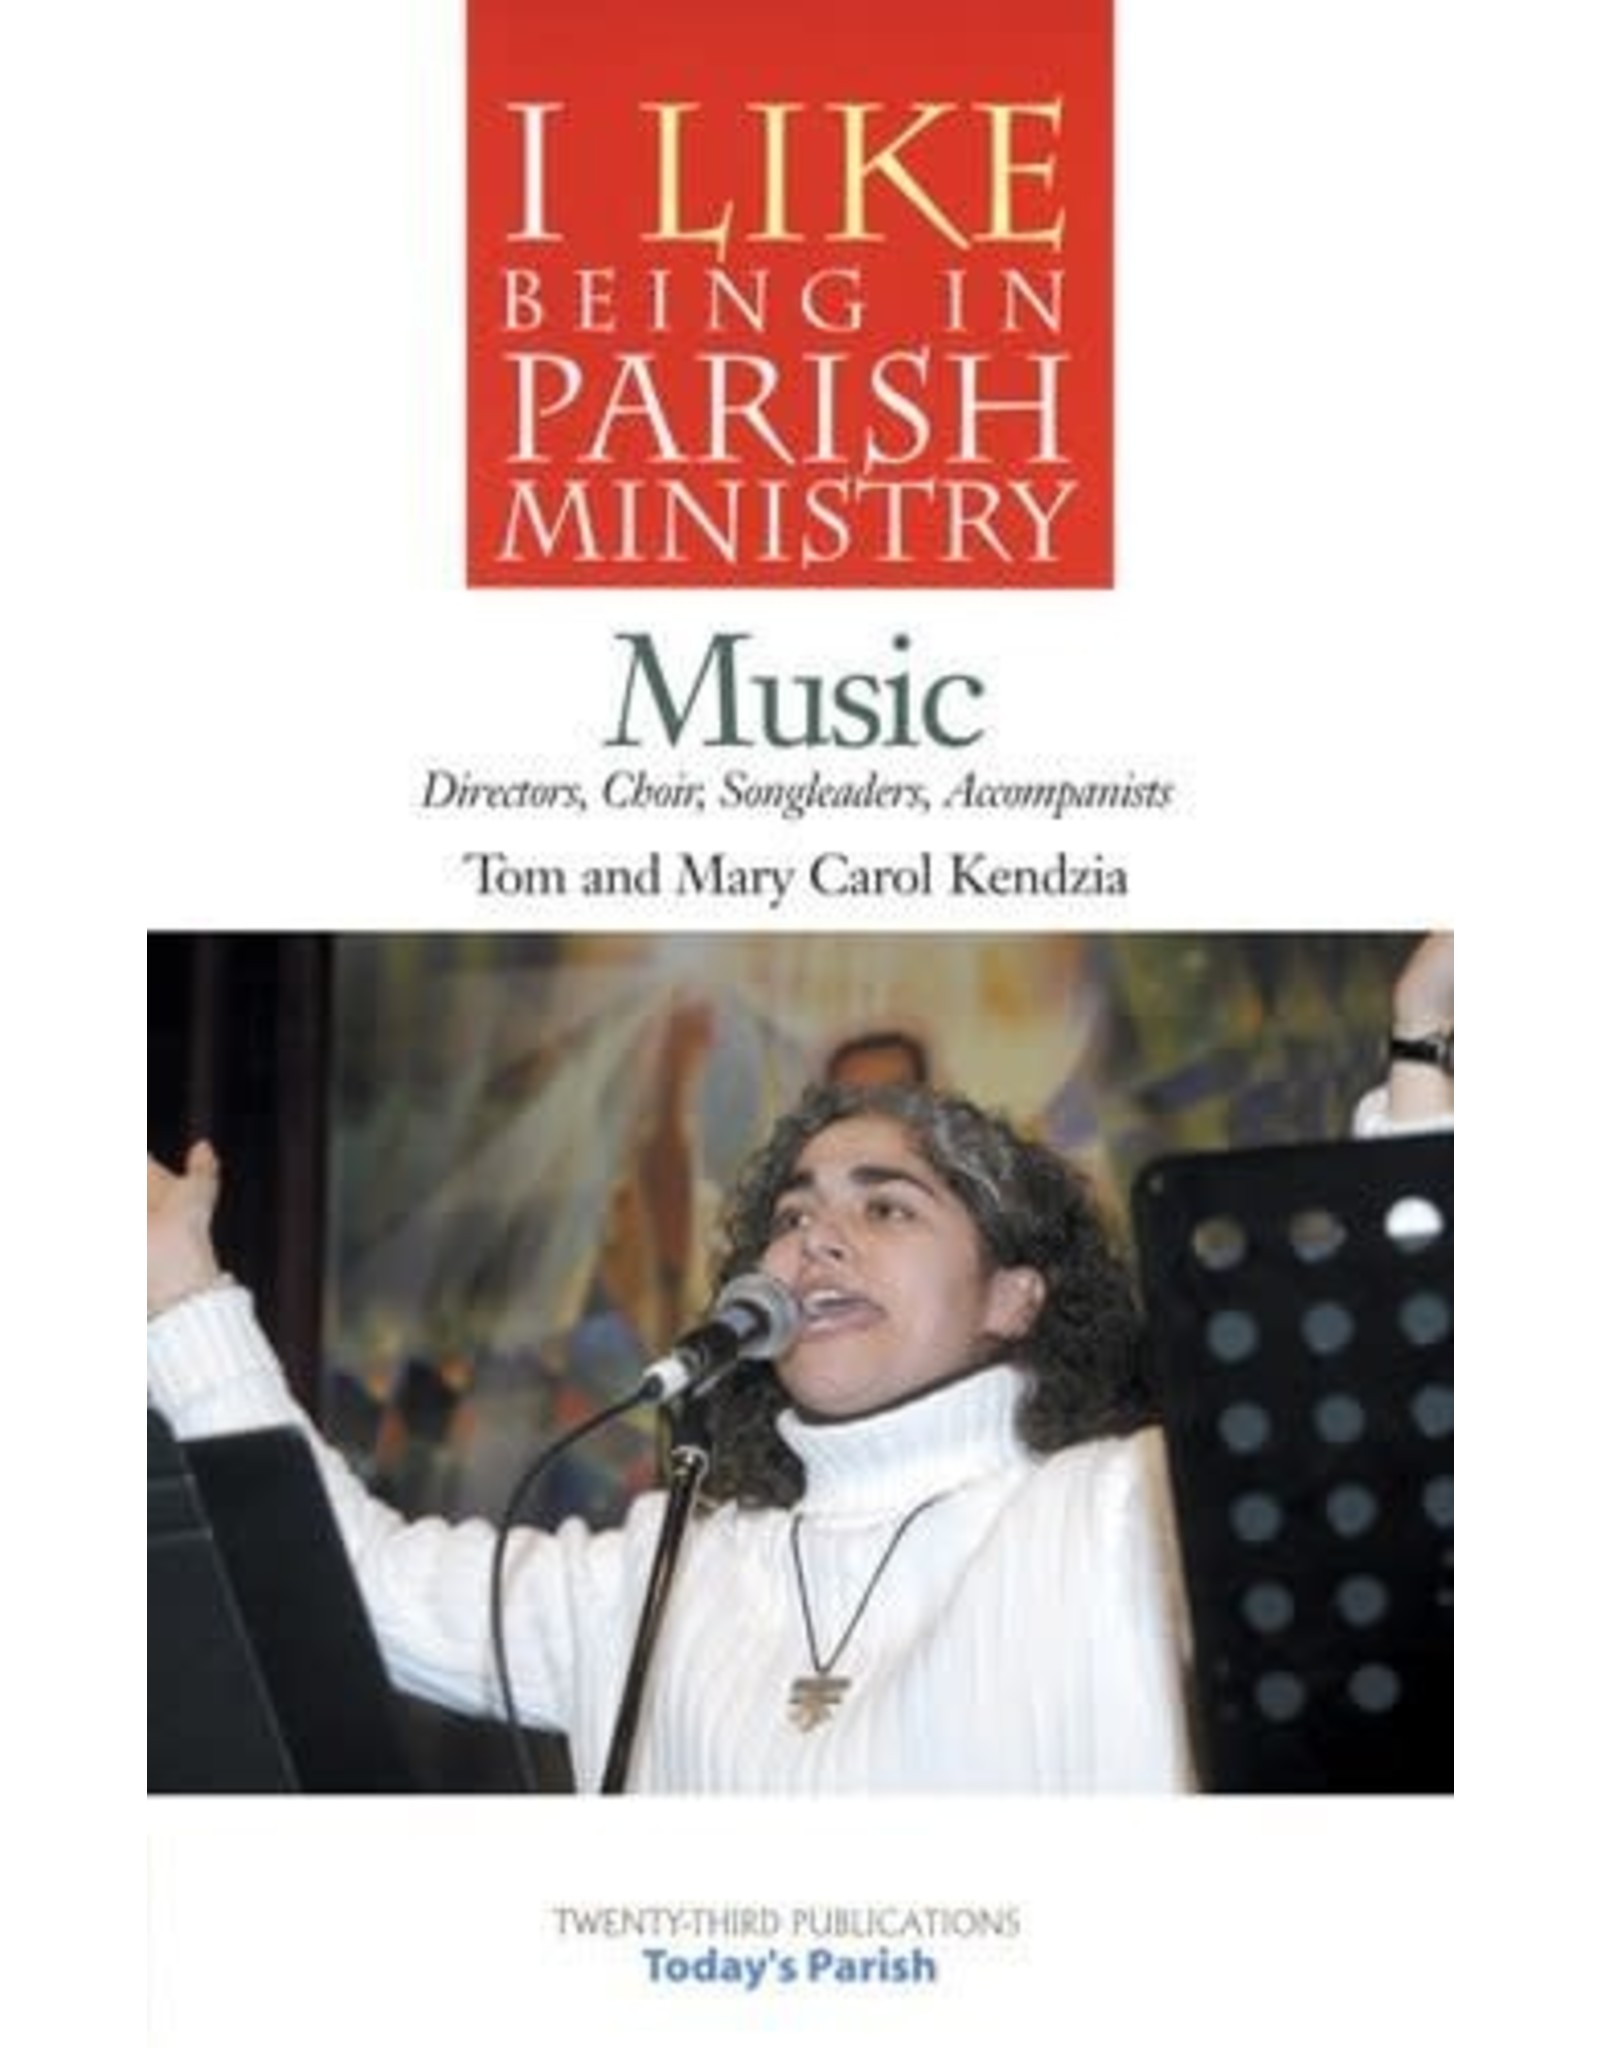 Music (I Like Being in Parish Ministry)